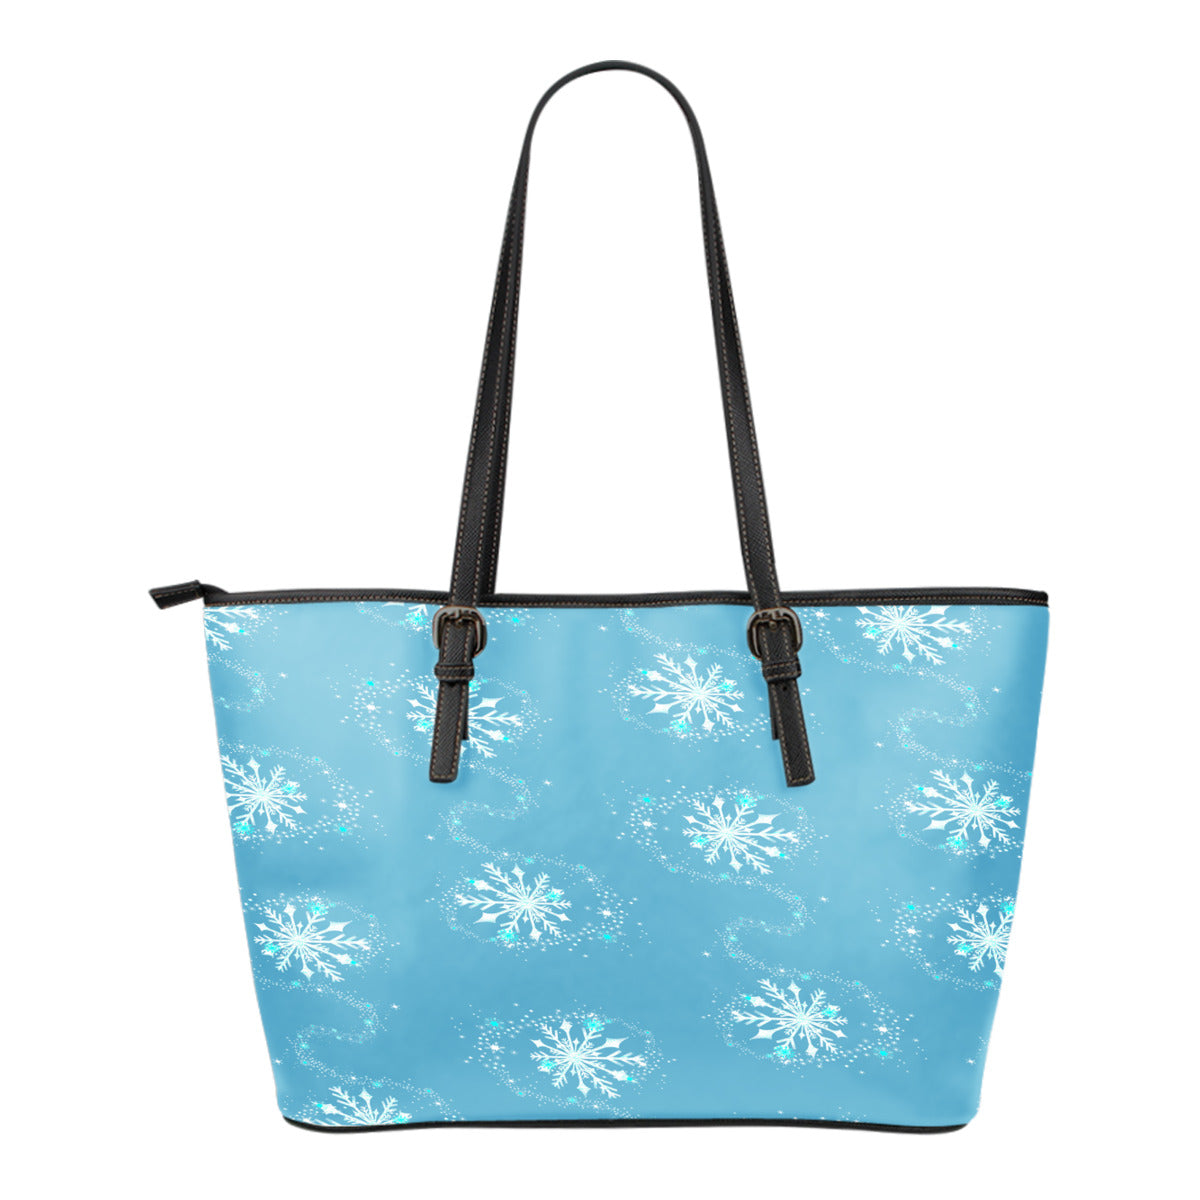 Frozen Themed Design C2 Women Small Leather Tote Bag